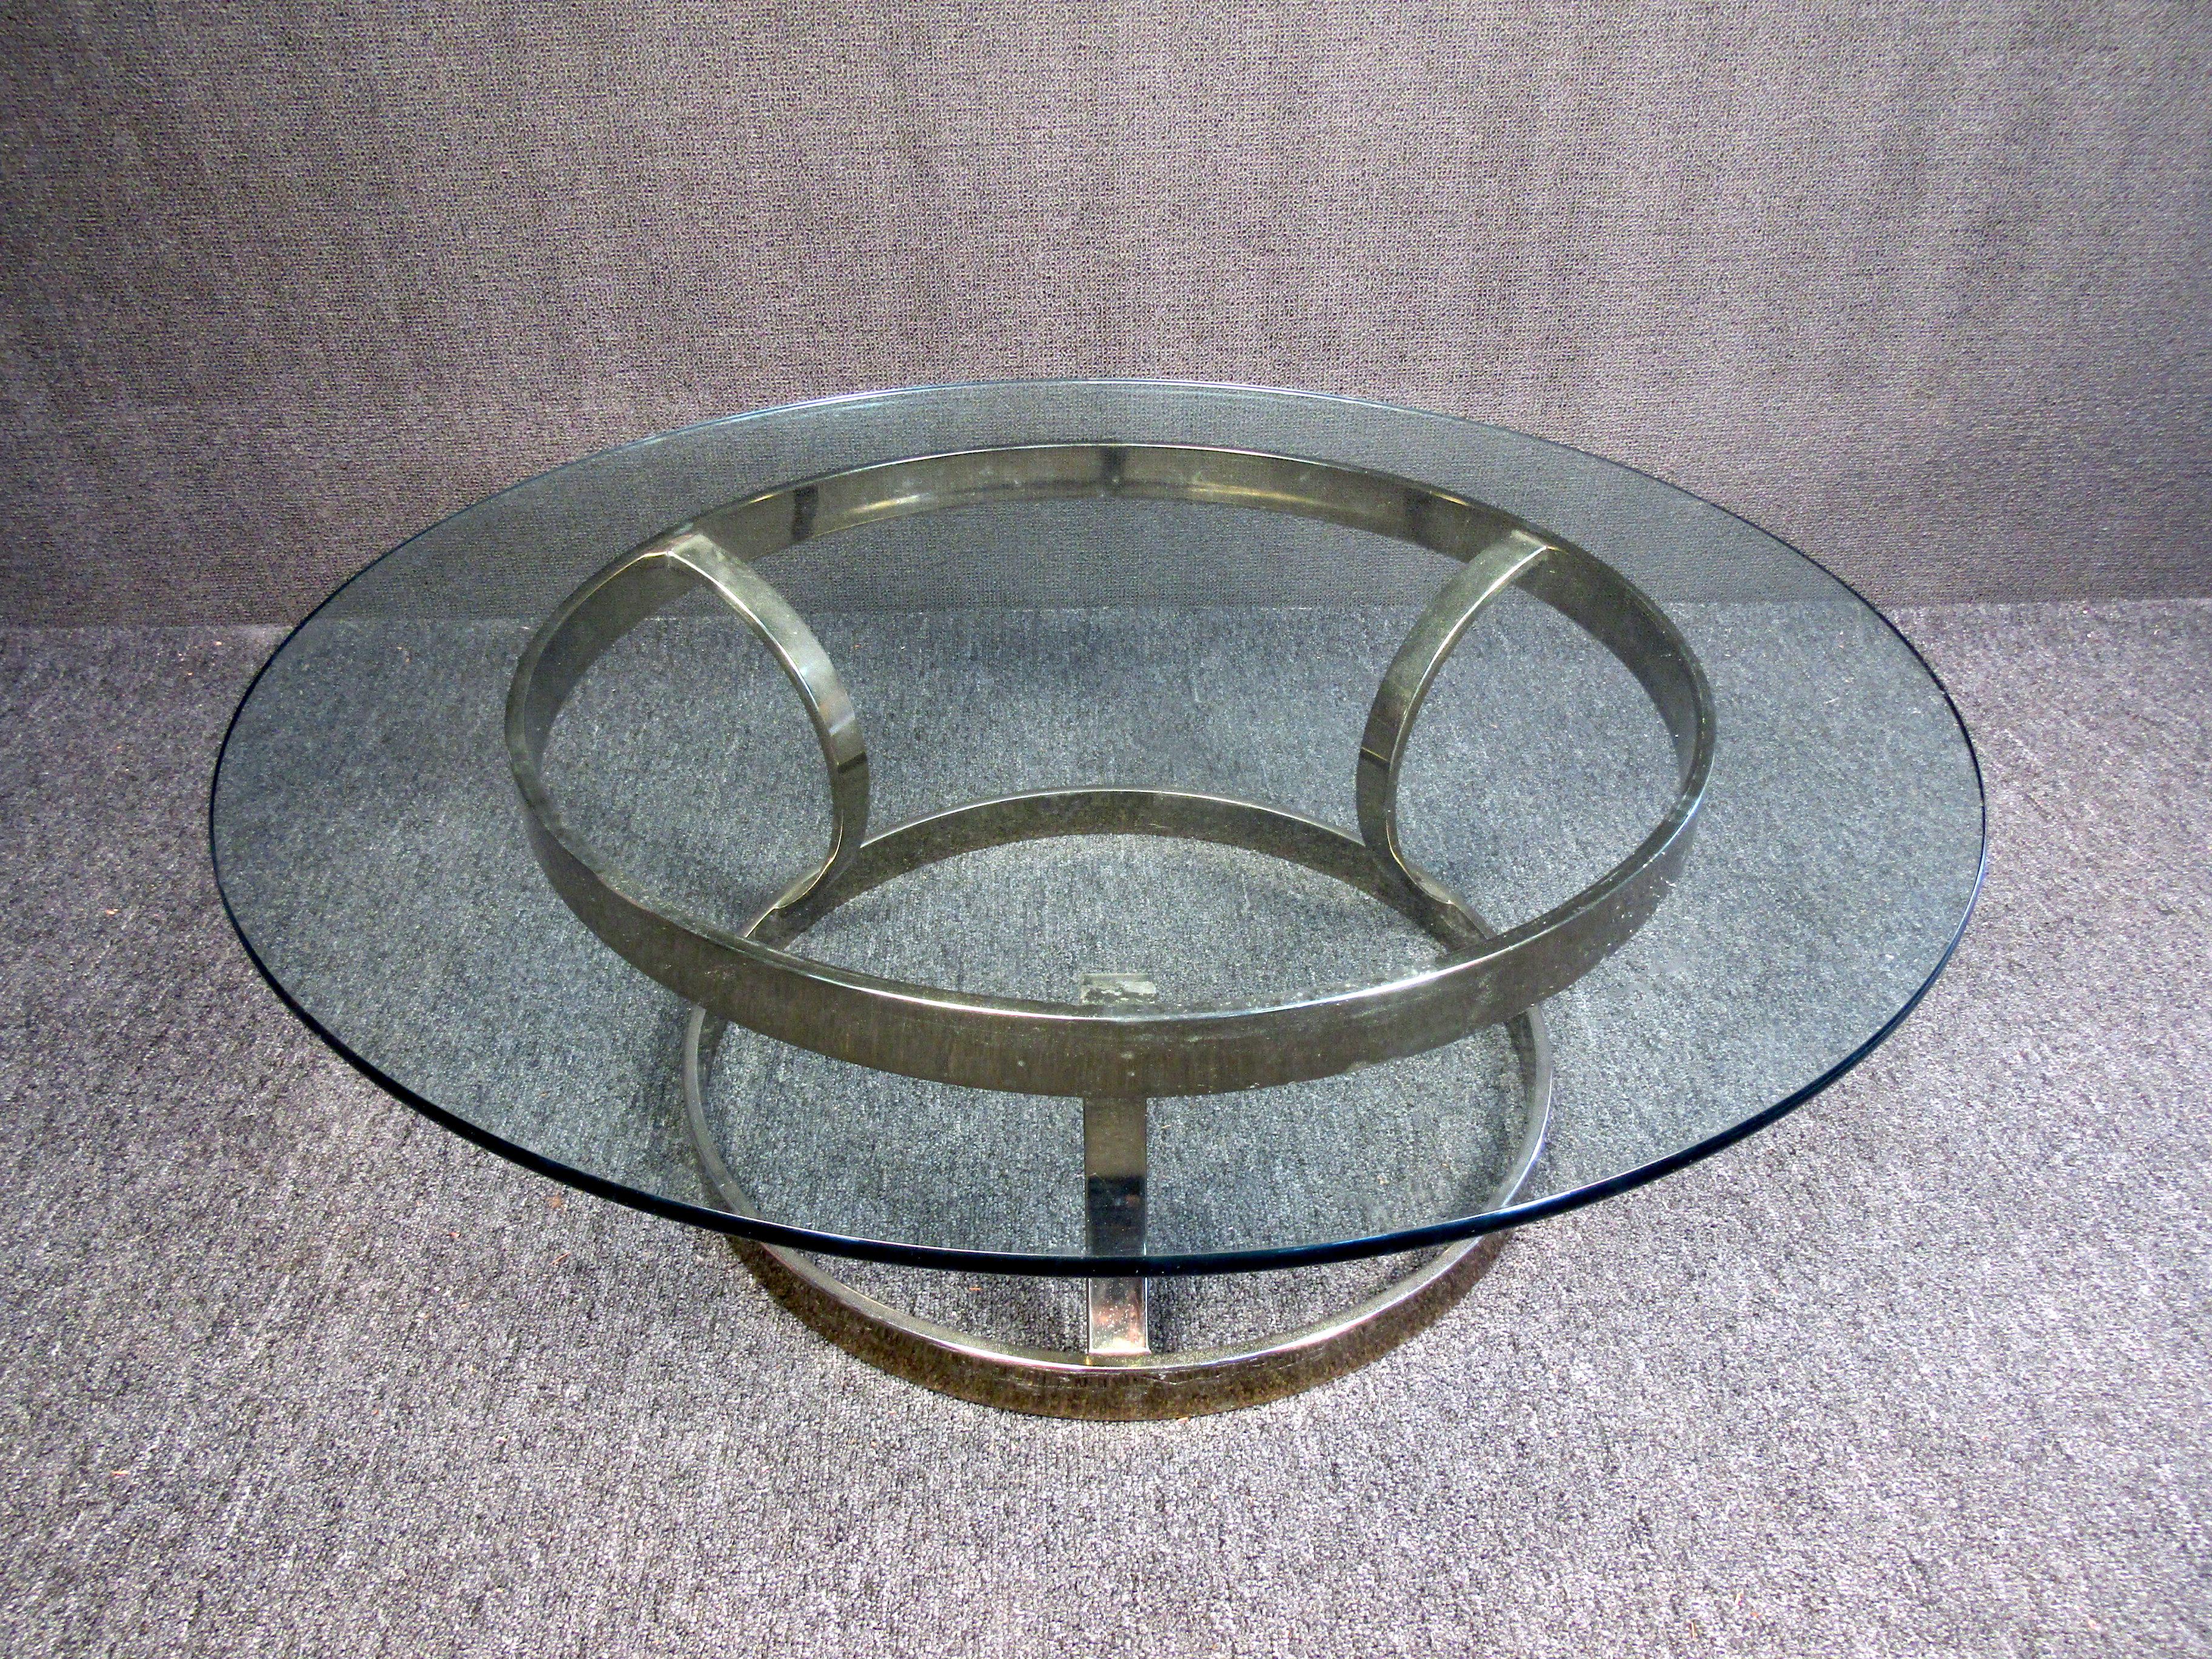 This vintage coffee table showcases a radiant brass bass through its clear glass top. Perfect for enjoying coffee or drinks with company, this Mid-Century Modern table is stylish and sturdy. Please confirm item location with seller (NY/NJ).